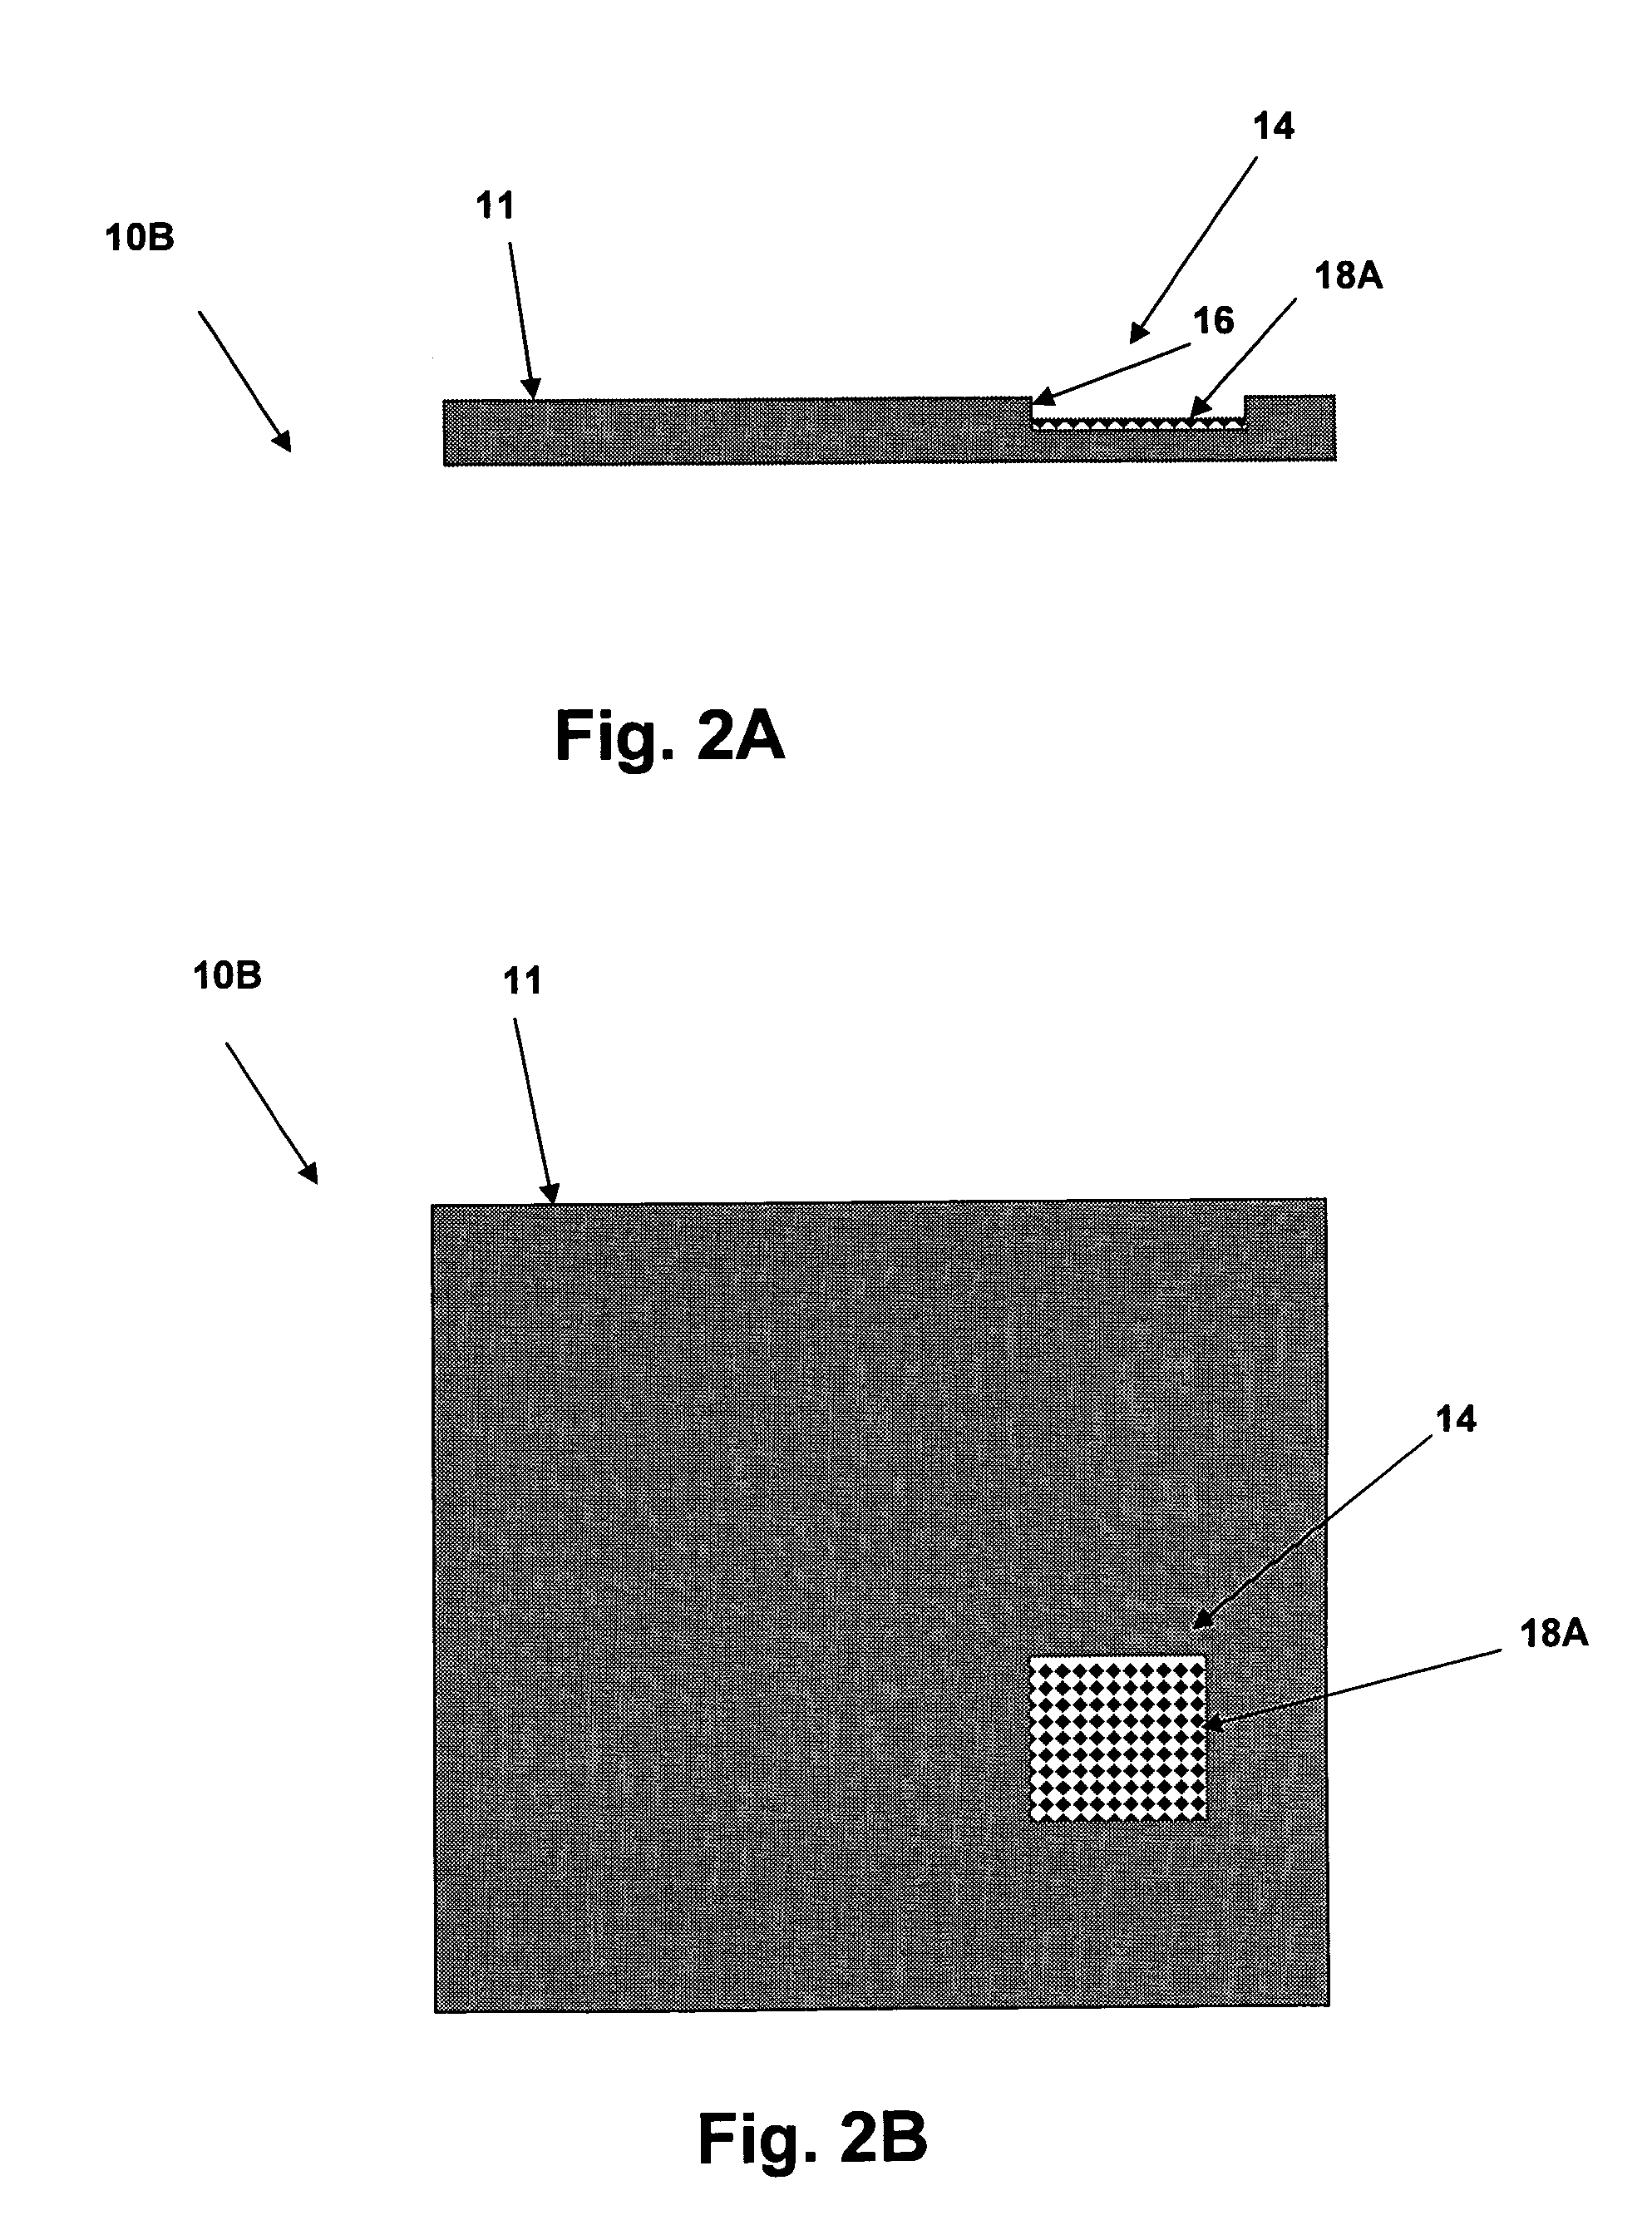 Method for making an integrated circuit substrate having embedded passive components